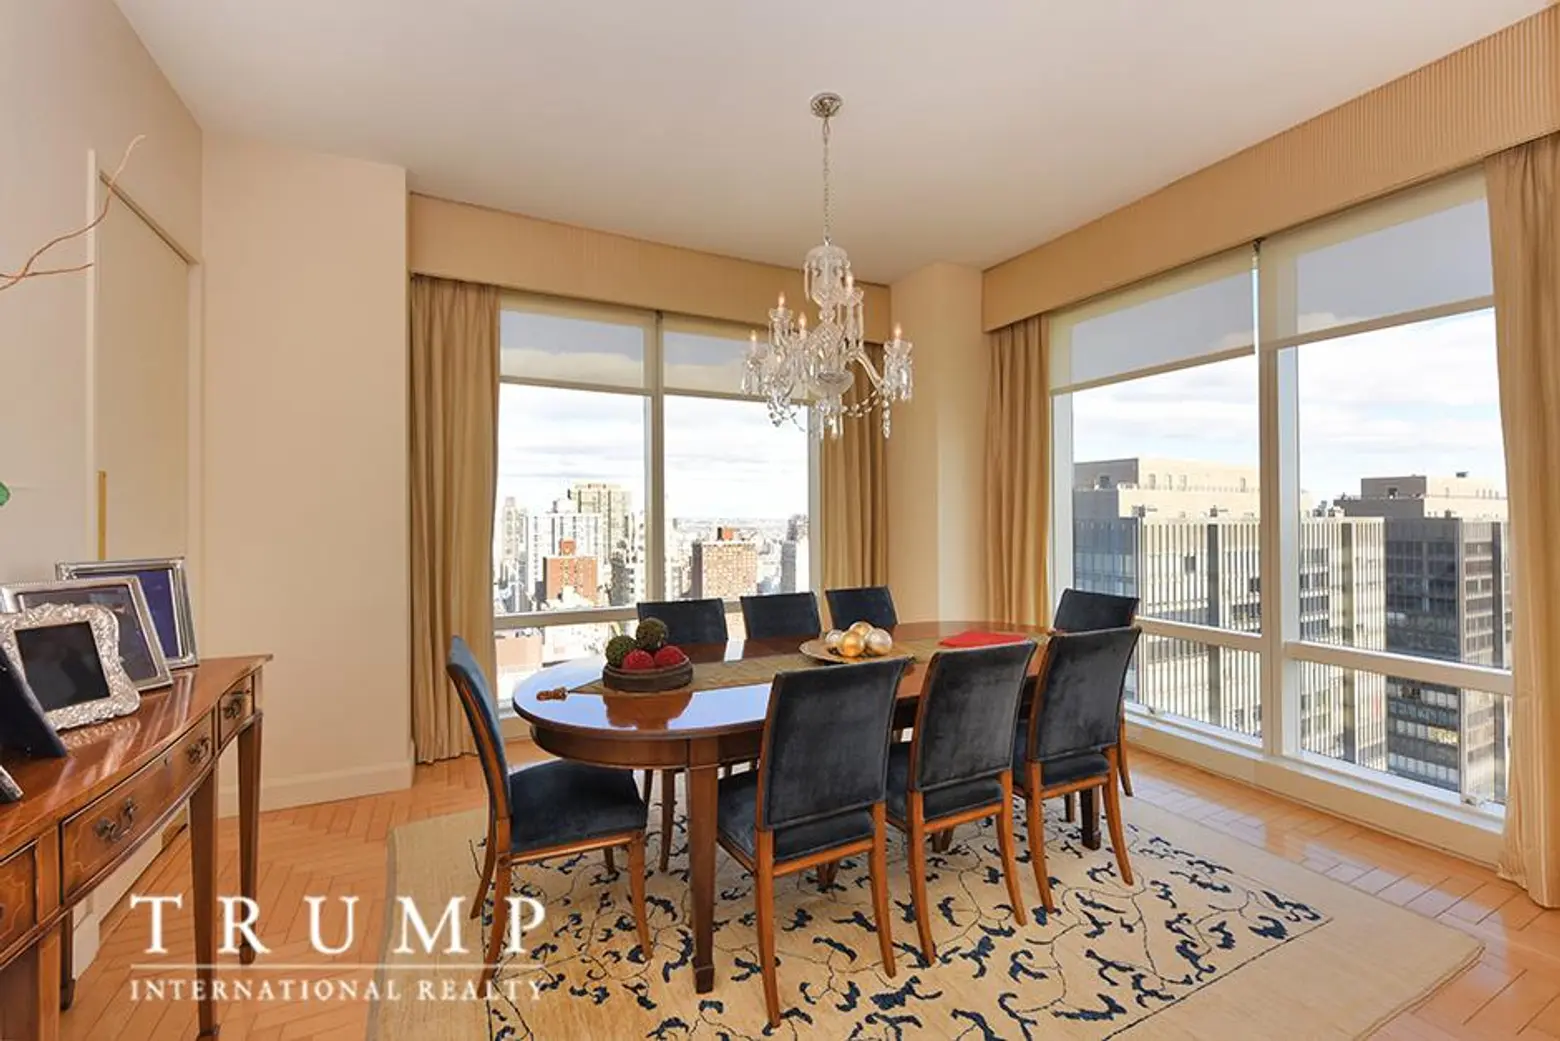 Trump World Tower, 845 United Nations Plaza, Michael Cohen